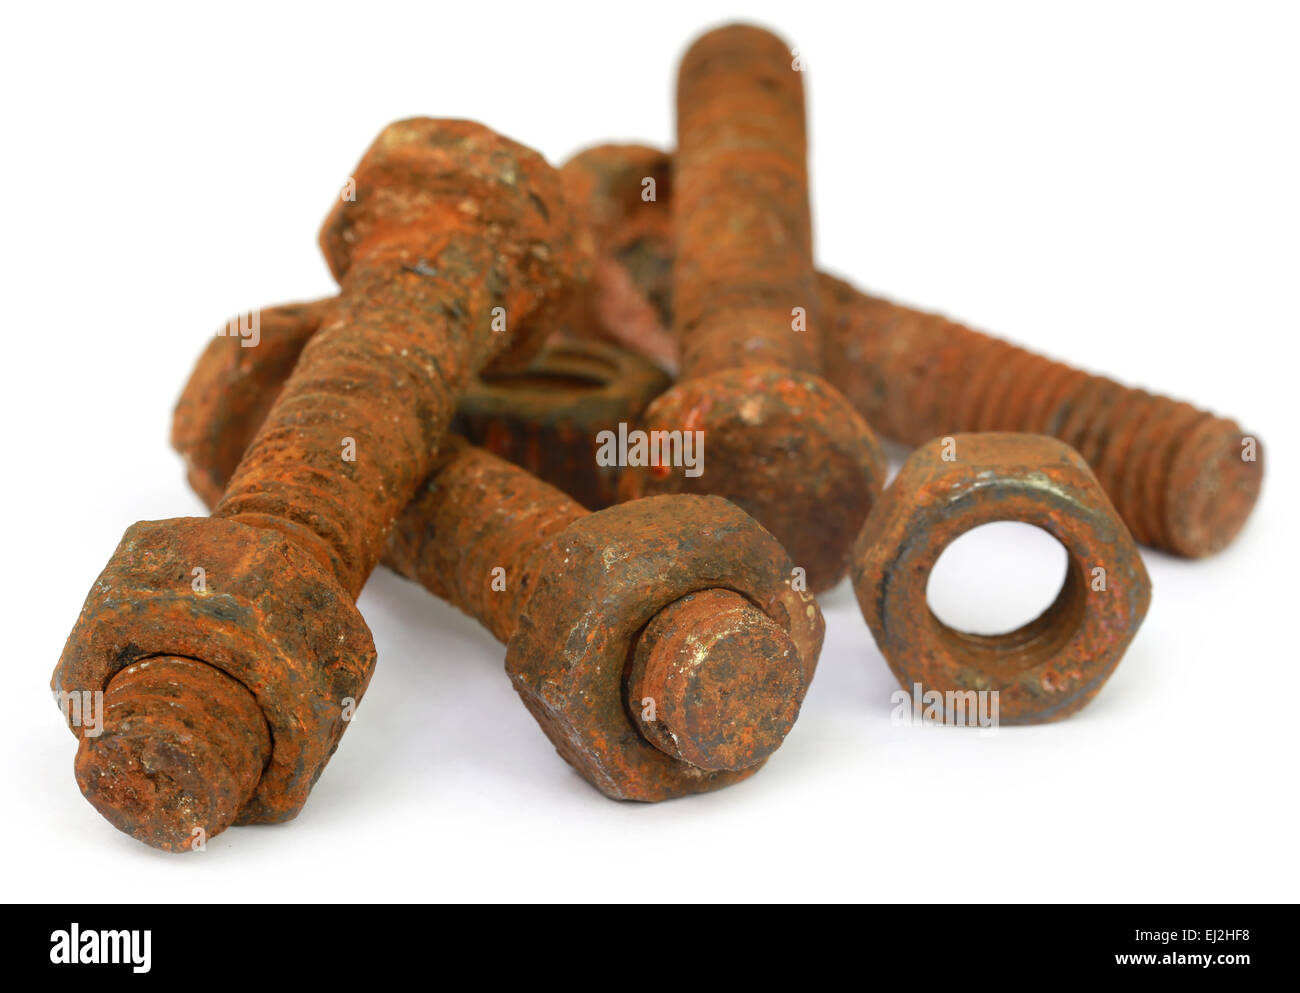 Rusty bolt and nut over white background Stock Photo